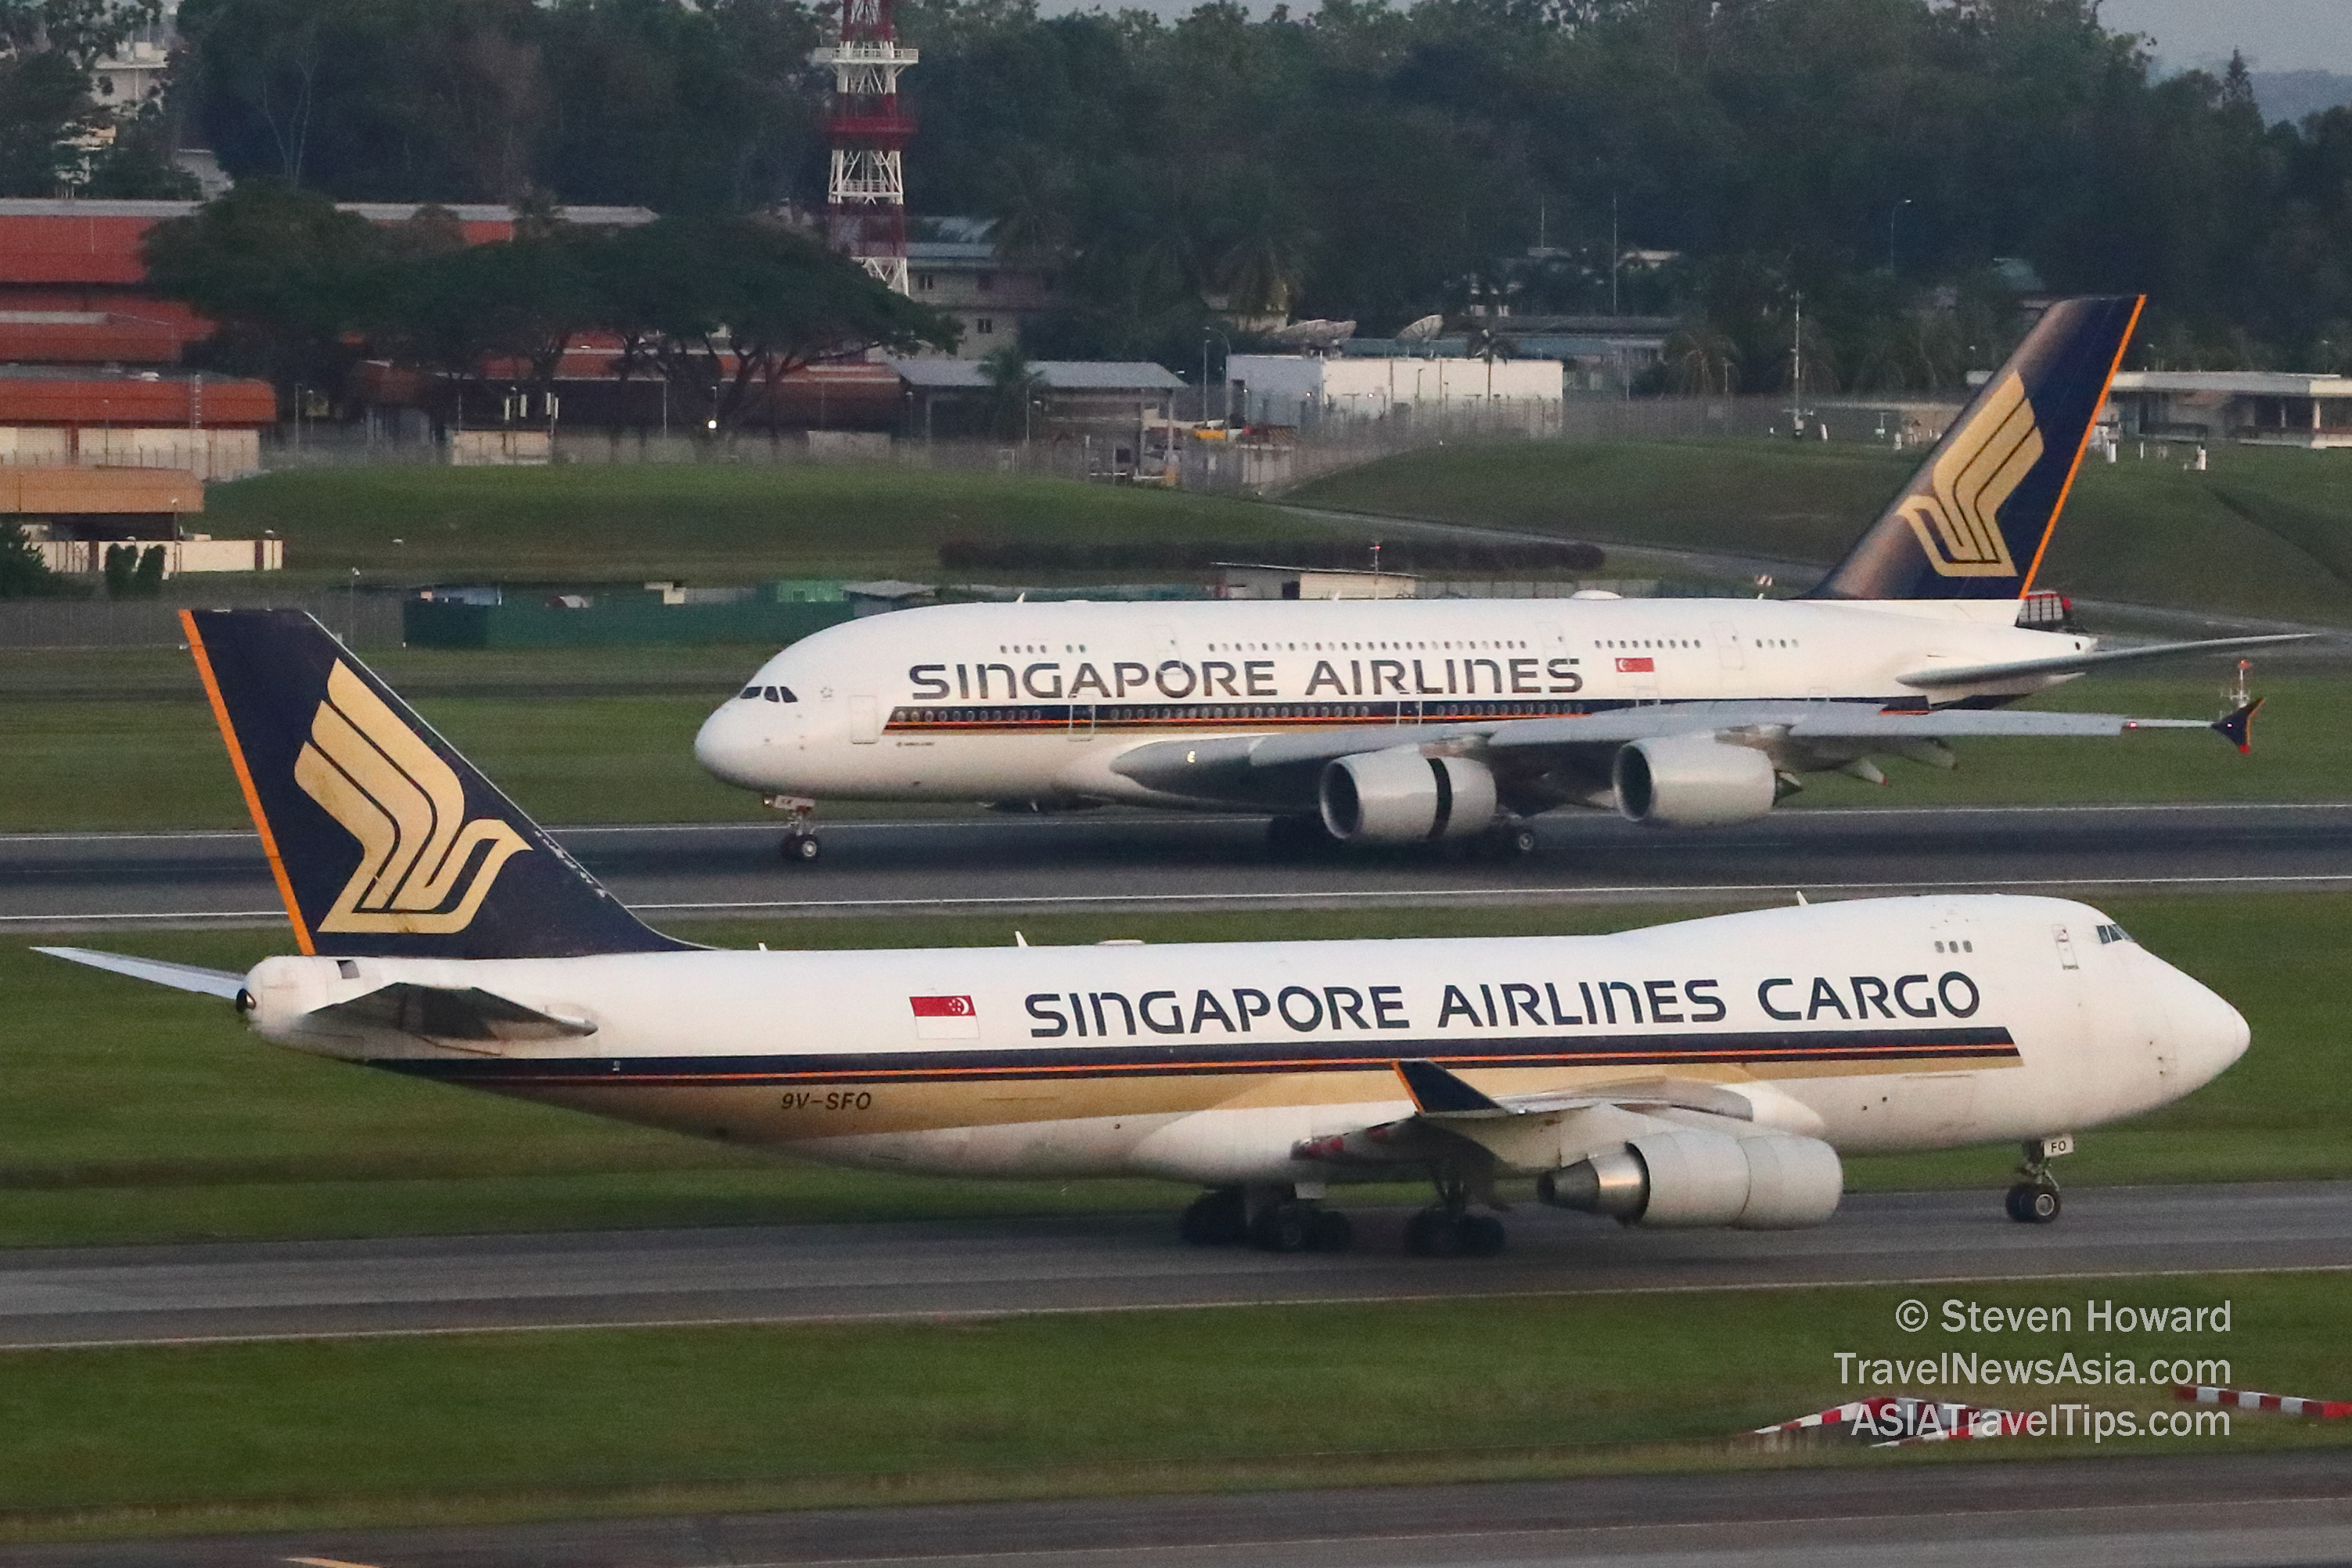 Singapore Airlines Boeing 747-4F reg: 9V-SFO in the foreground with a Singapore Airlines Airbus A380 in the background. Picture by Steven Howard of TravelNewsAsia.com Click to enlarge.